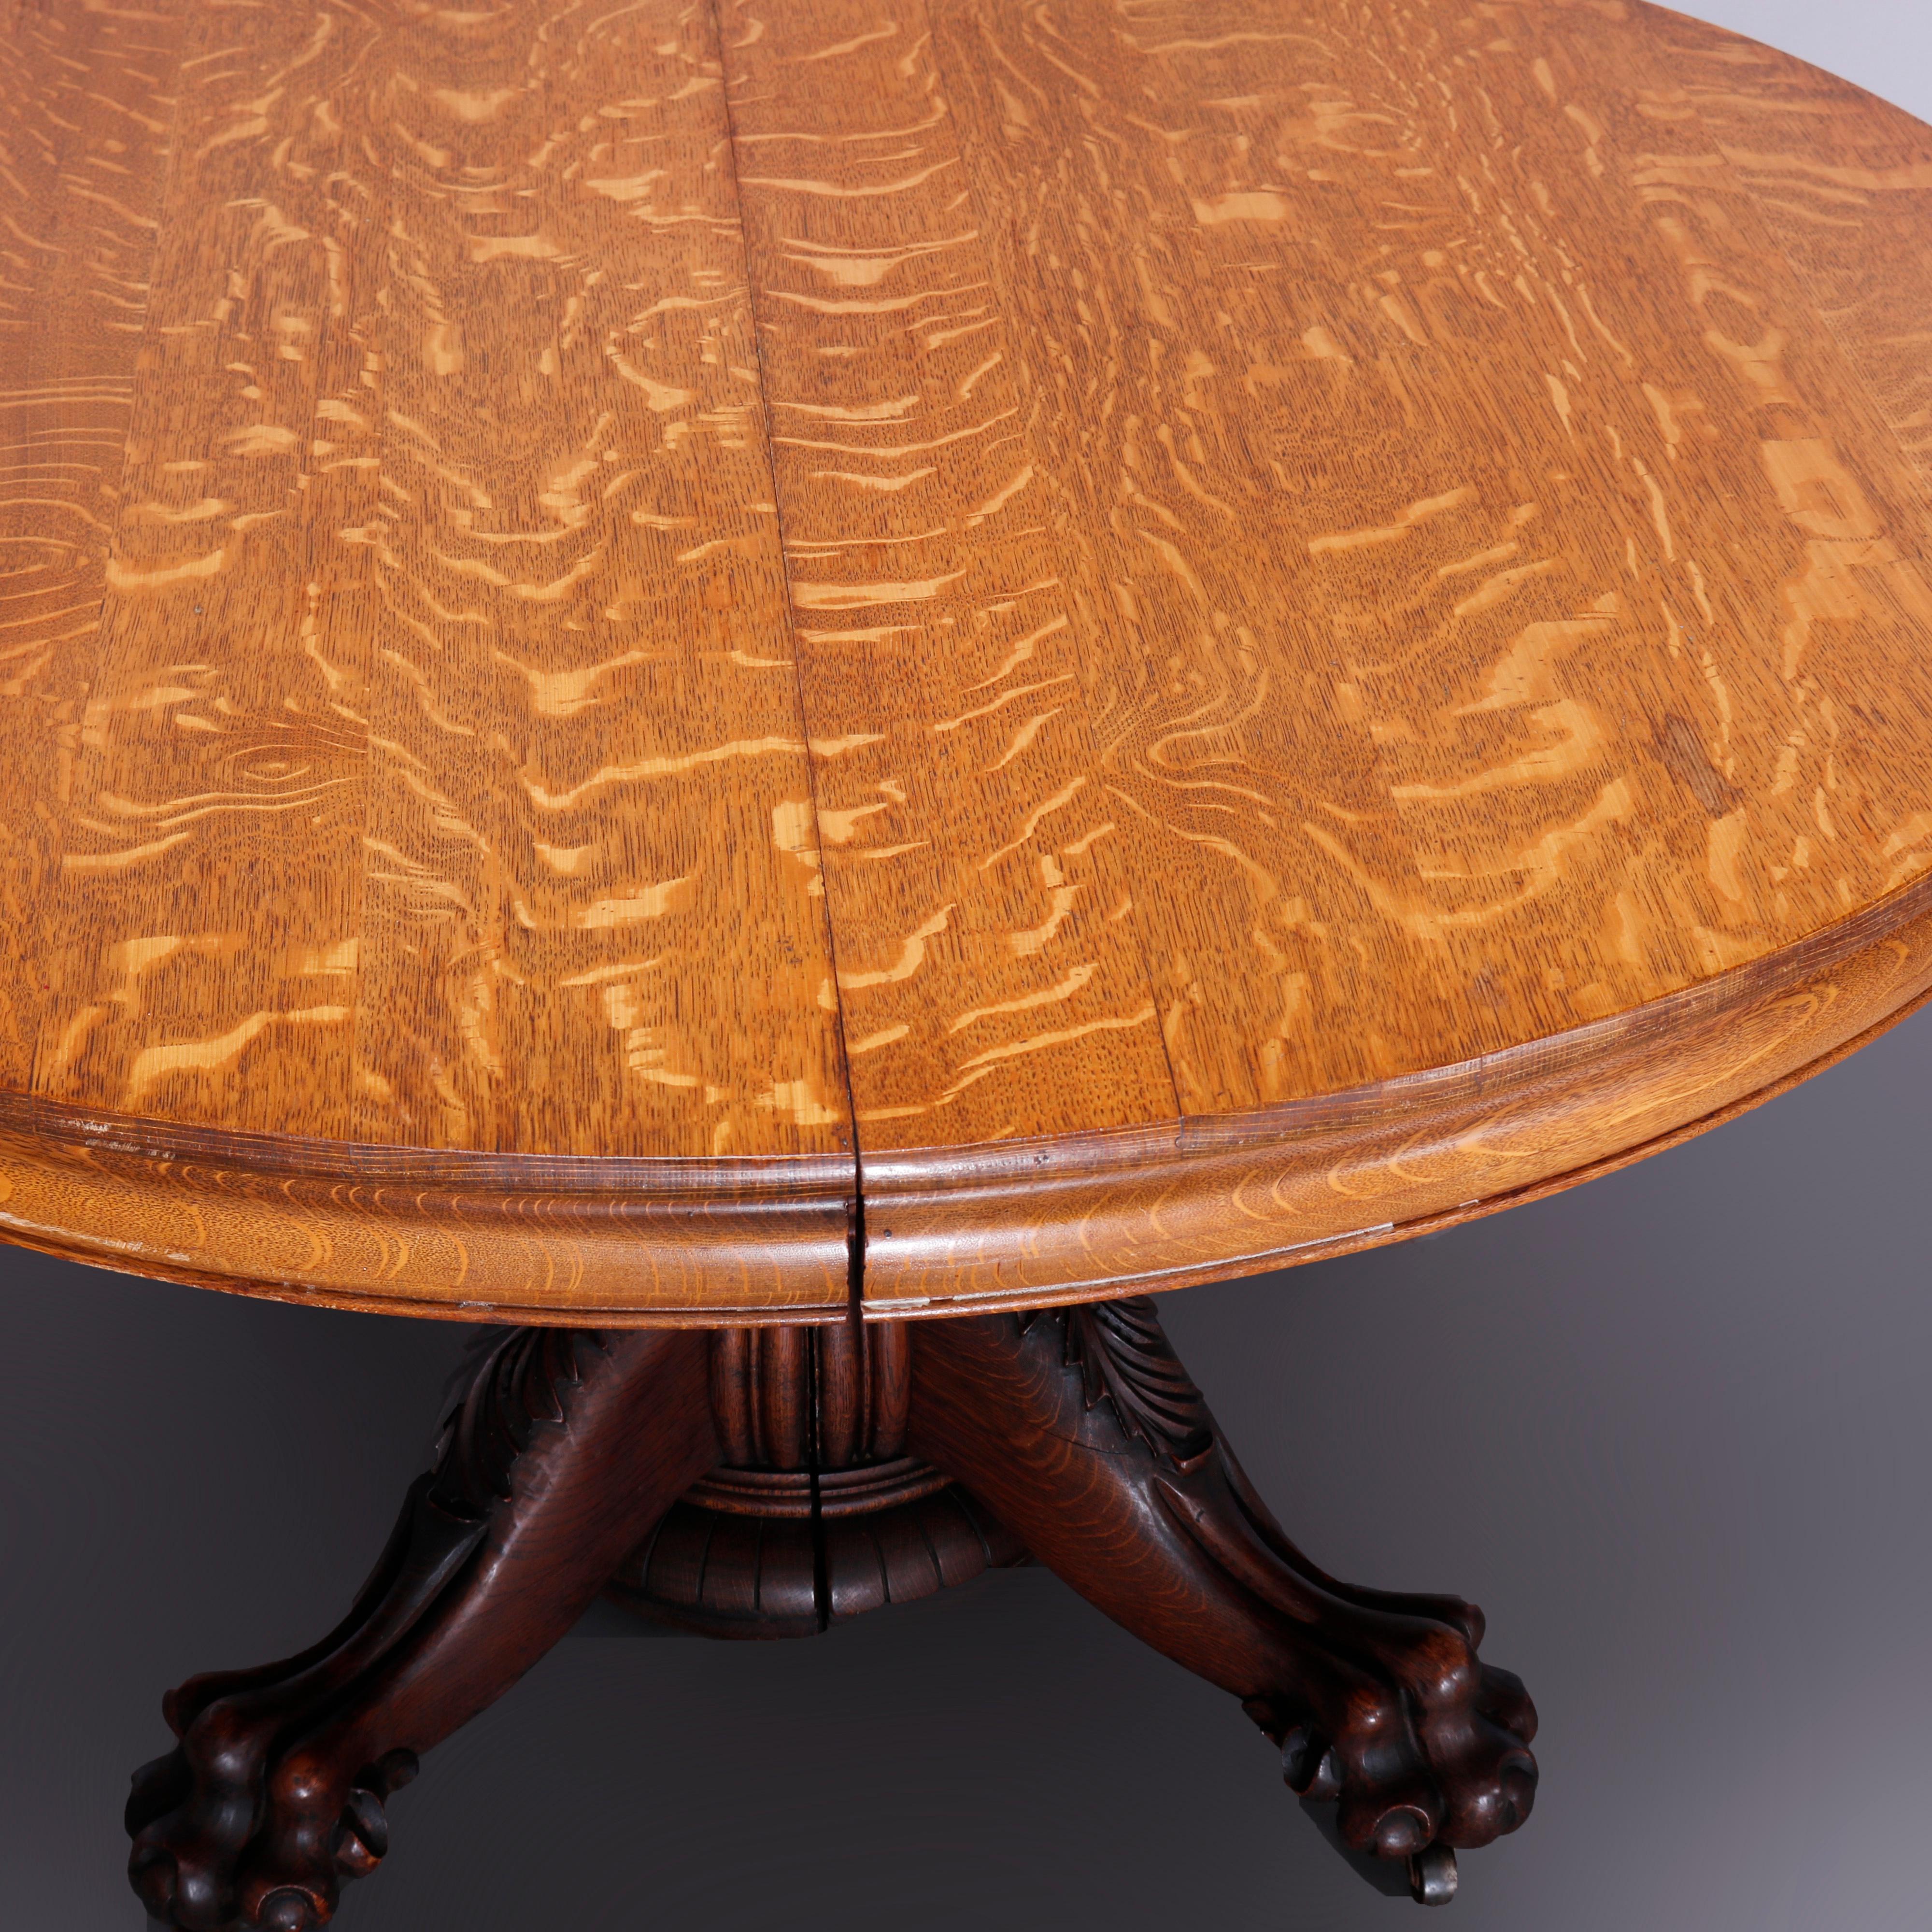 AntiqueHastings Round Oak Carved Claw Foot Banquet Dining Table & 5 Leaves c1910 5